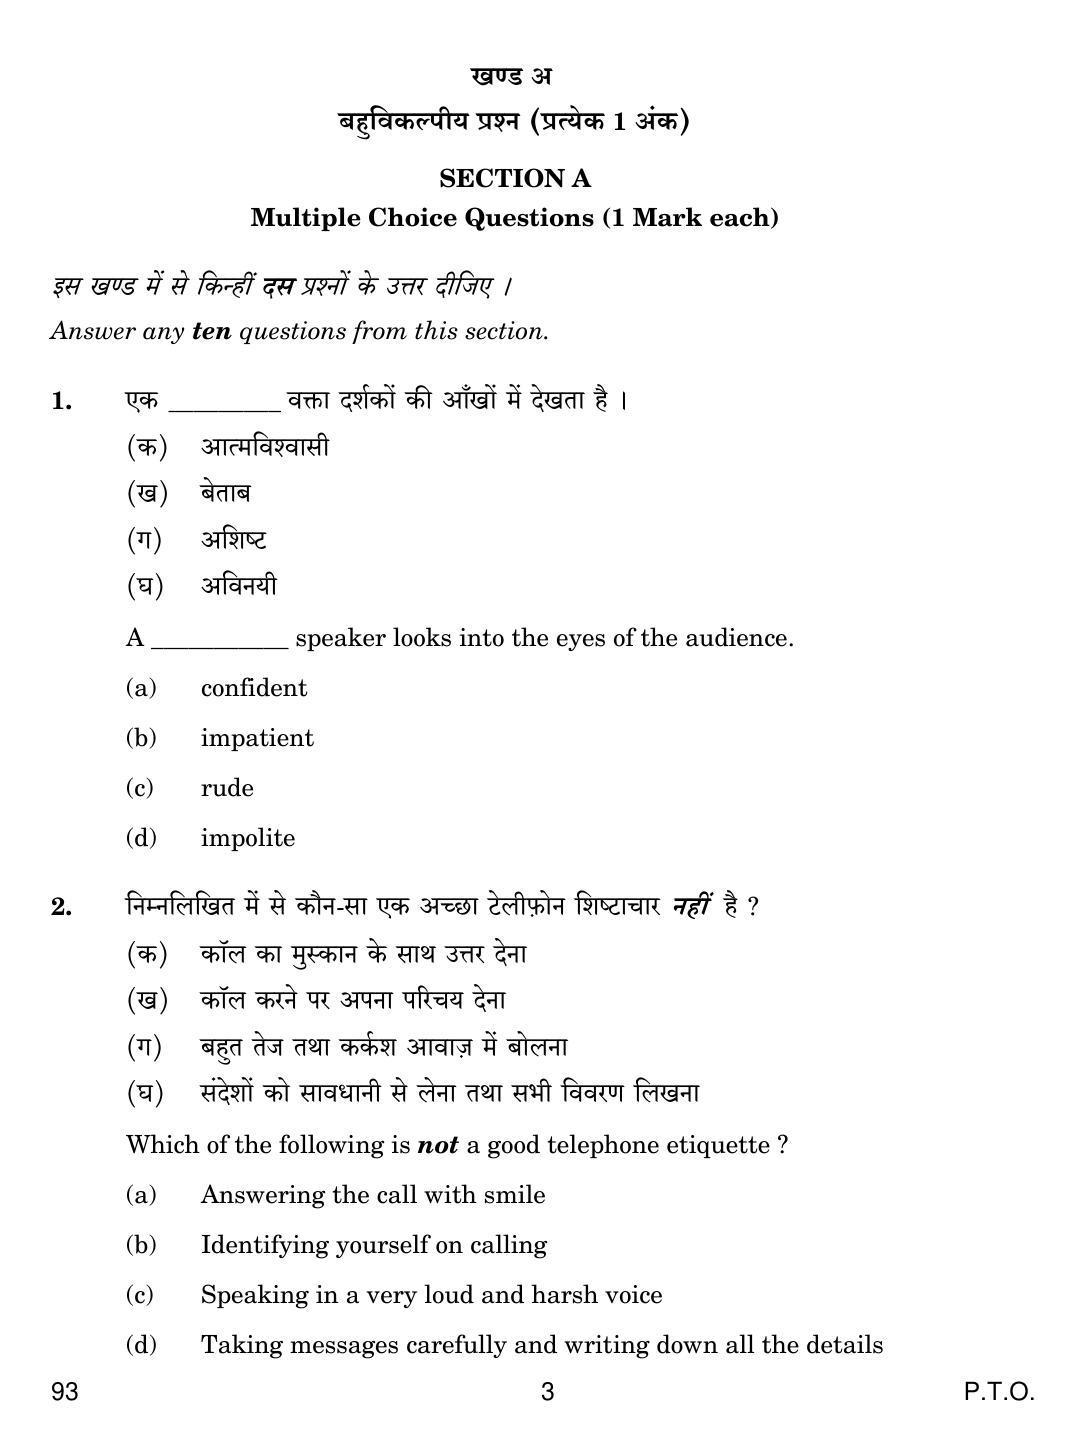 CBSE Class 10 93 INTRODUCTION TO TOURISM 2019 Question Paper - Page 3